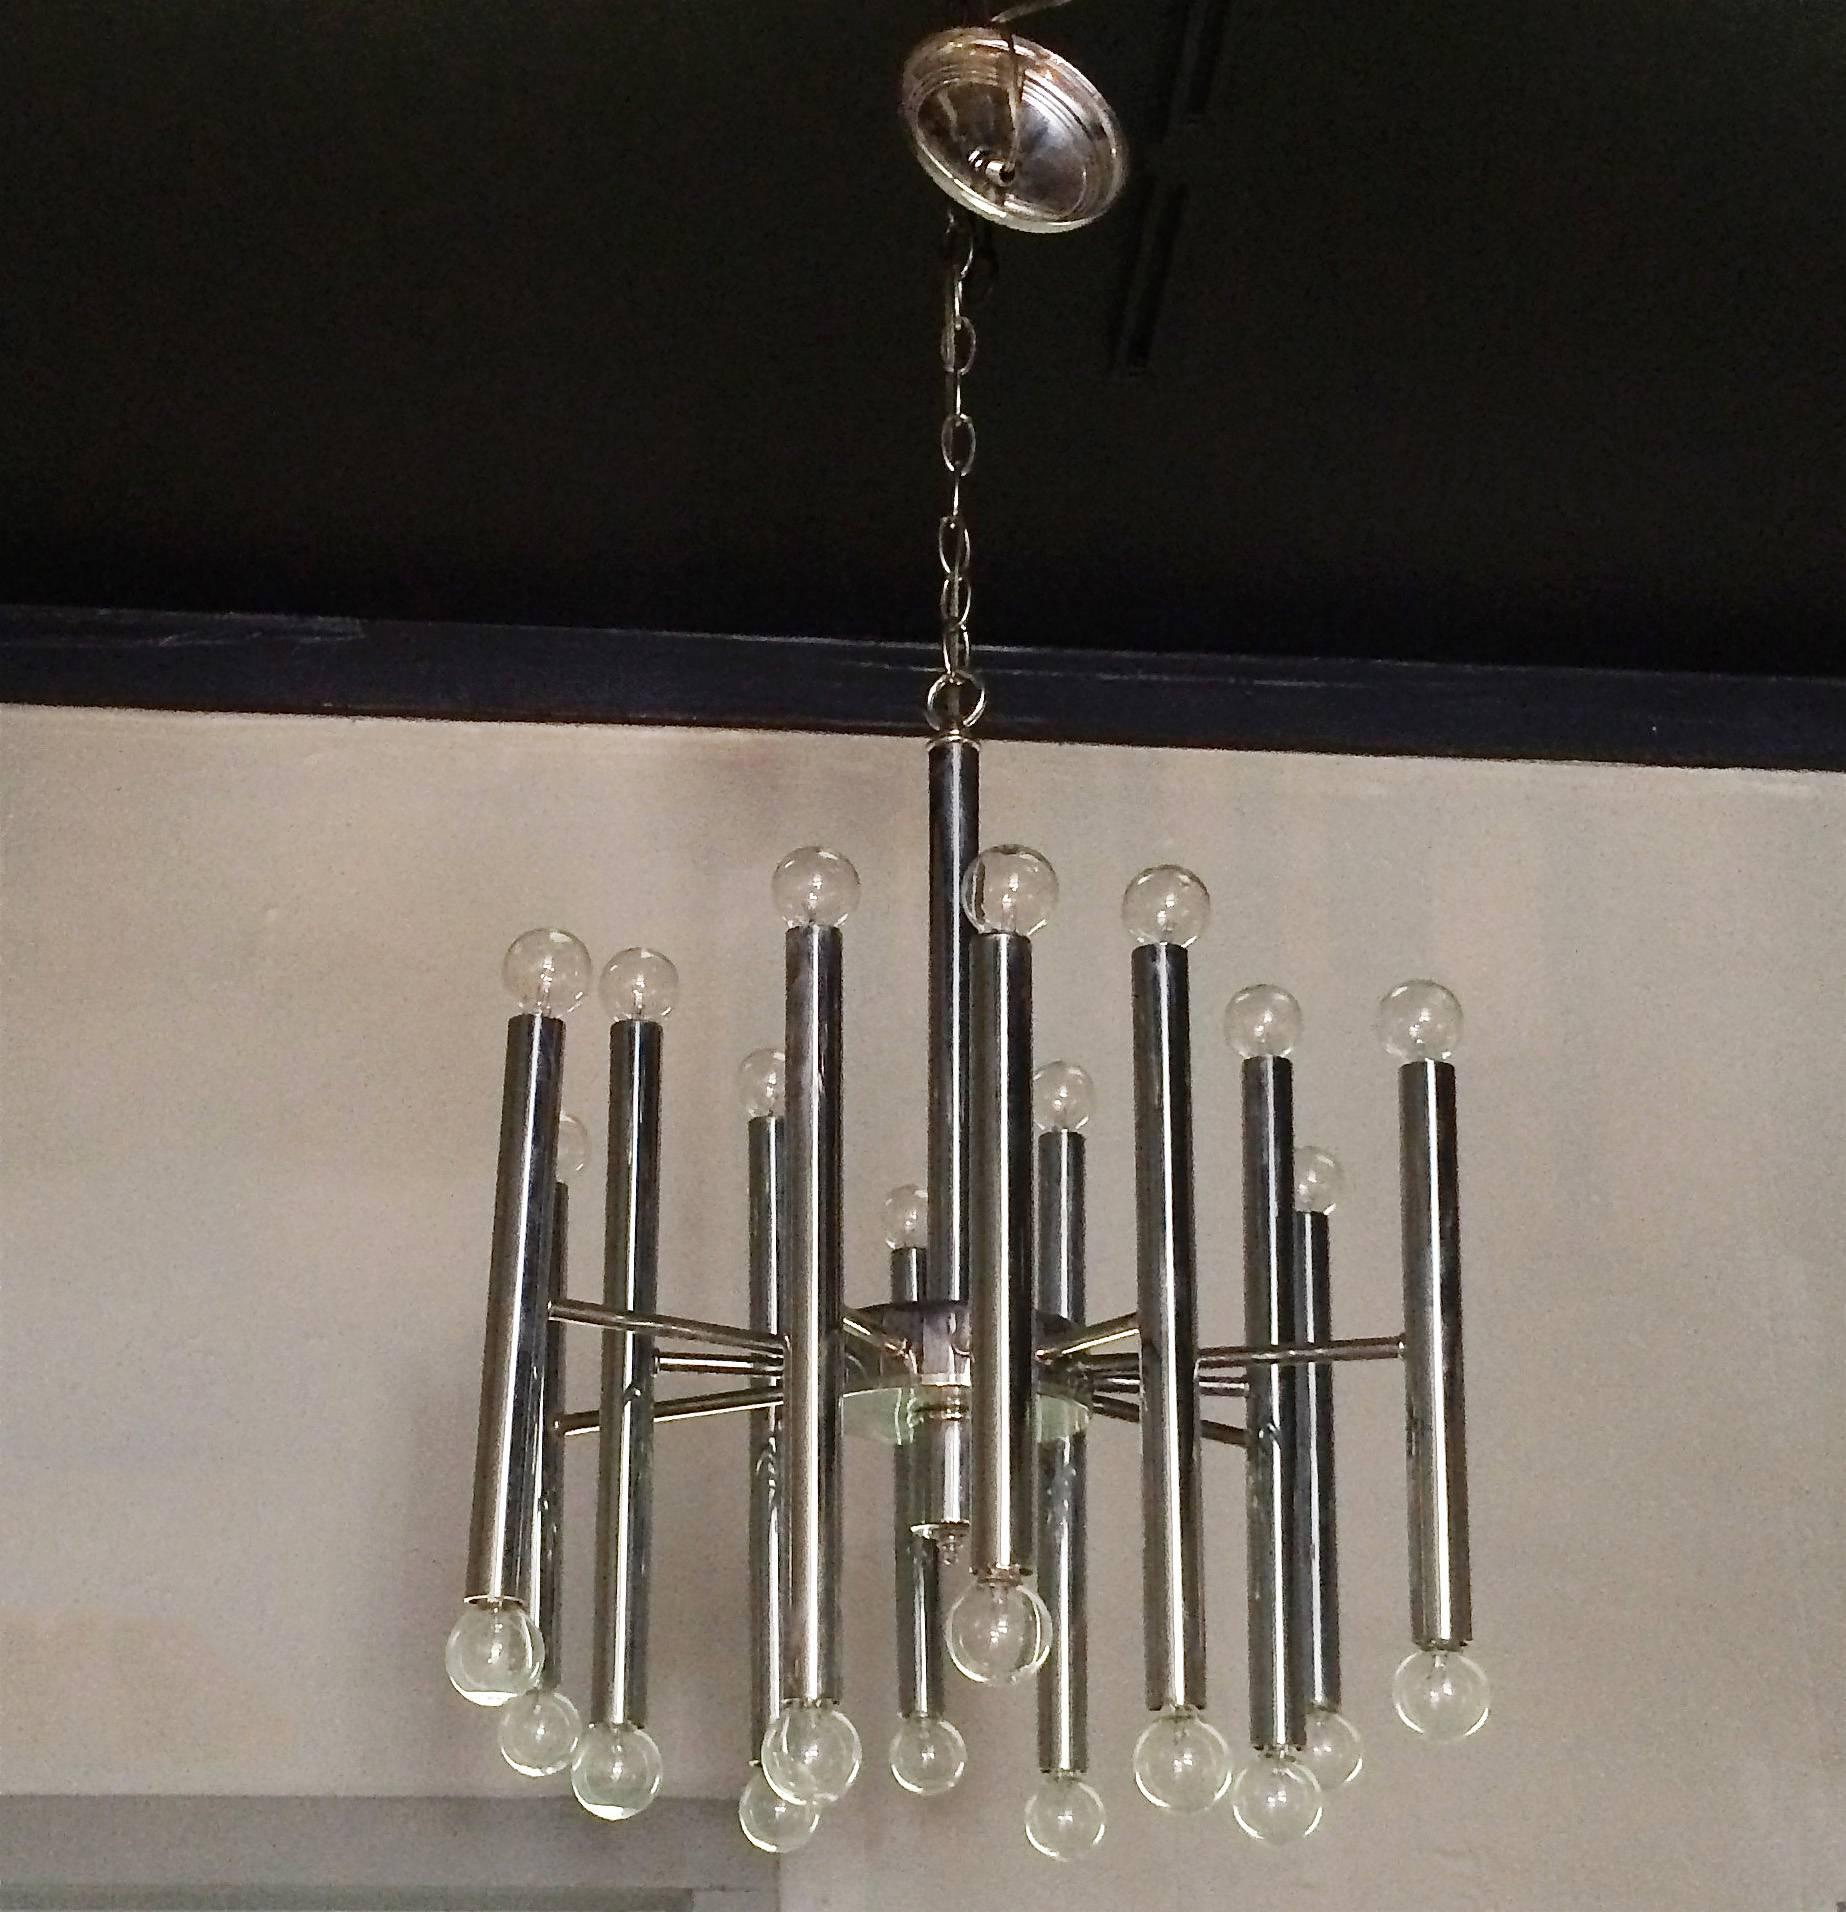 Mid-Century Modern, 1960s, tubular chrome chandelier with 12 arms that light on each end for a total of 24 candelabra bulbs in the style of Gaetano Sciolari. Matching canopy included.